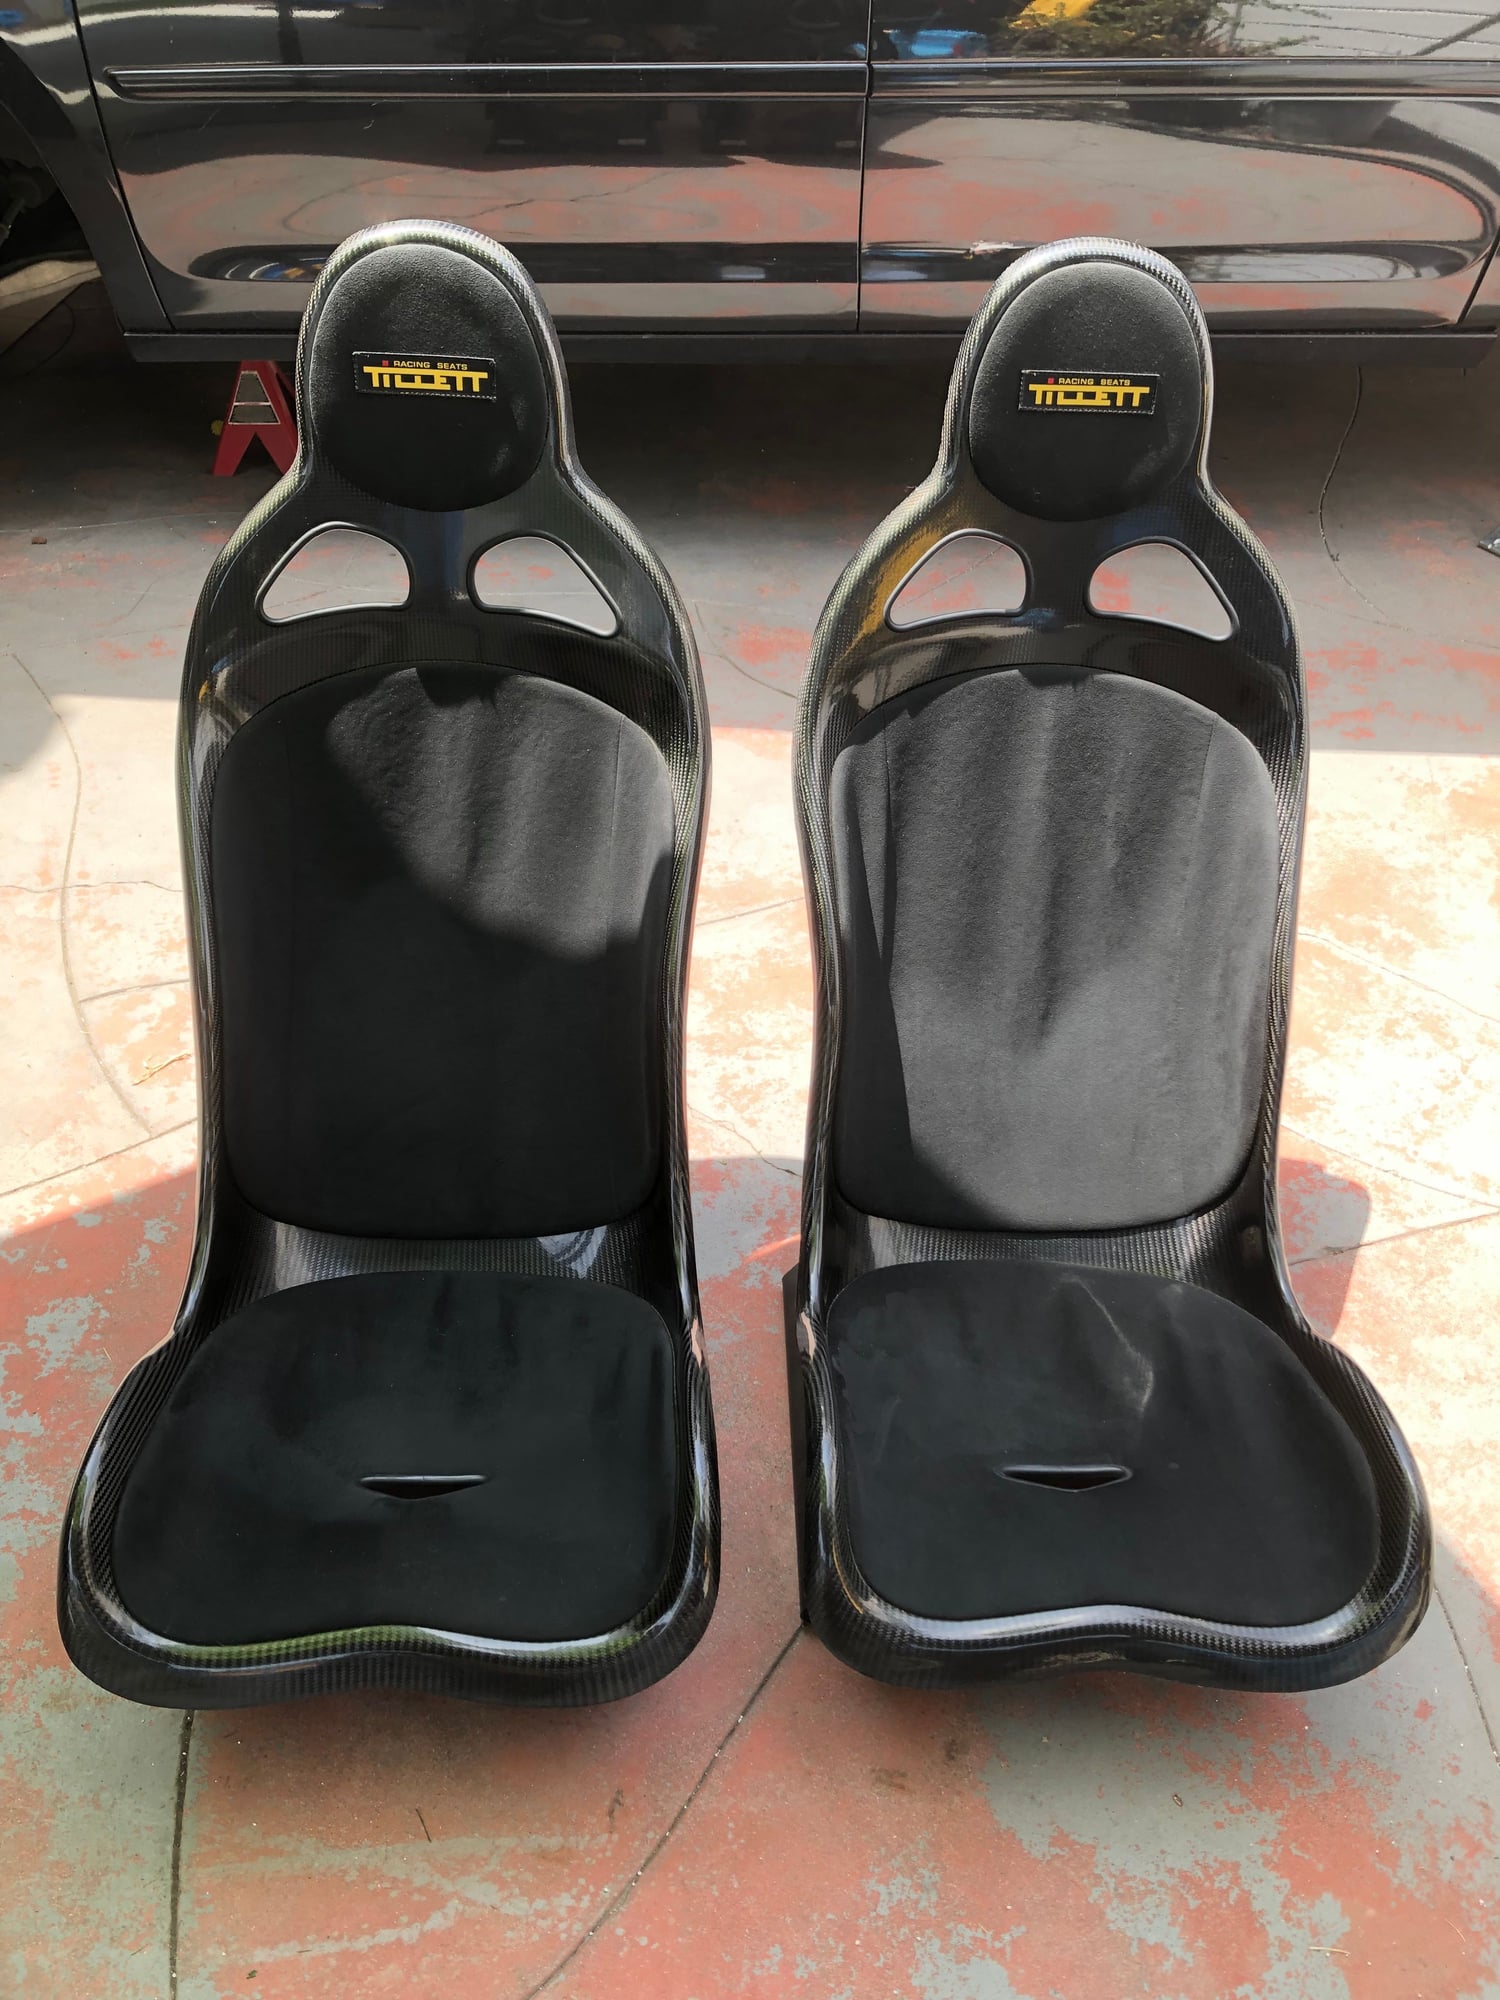 Interior/Upholstery - Pair of Tillett B1 full carbon fiber seats with brackets and pads - Used - All Years Any Make All Models - Lakewood, CA 90712, United States